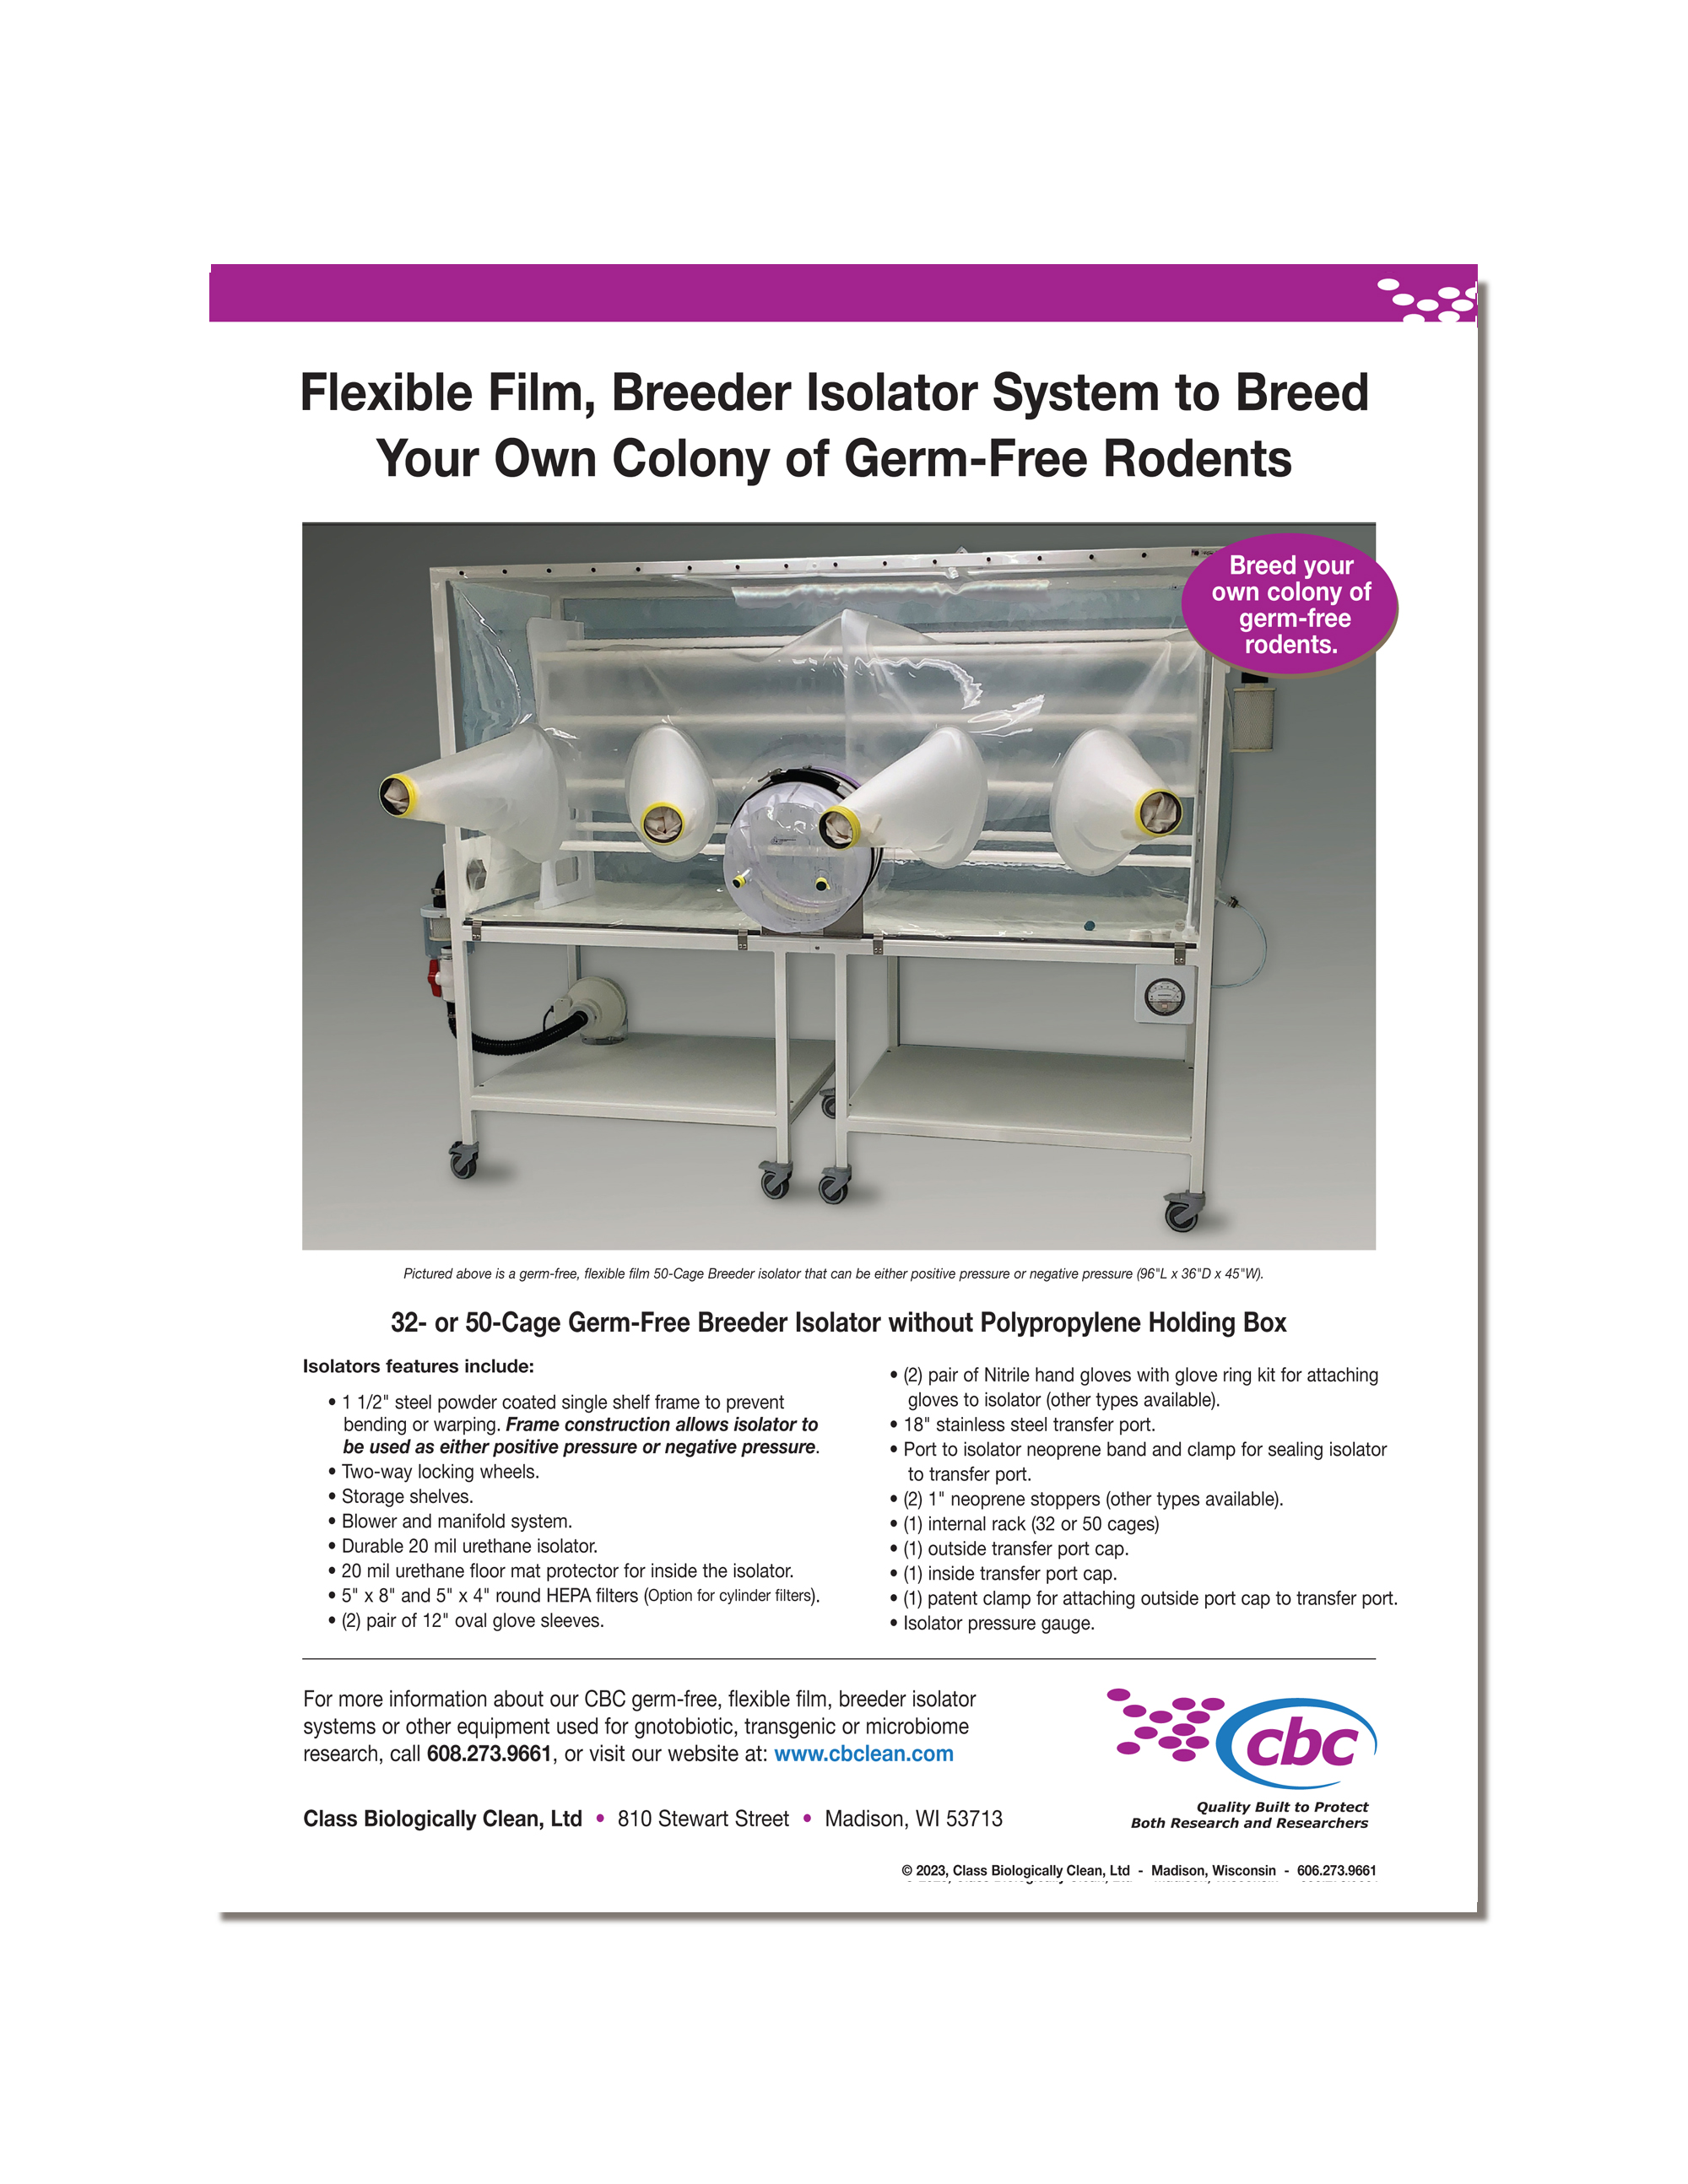 New CBC breeder isolator without the polypropylene holding box come with all the components and accessories to establish a fully functional germ-free, gnotobiotic lab that offers complete environmental control for gnotobiotic, microbiome and other research using mice or other rodents. Click here to download flyer.